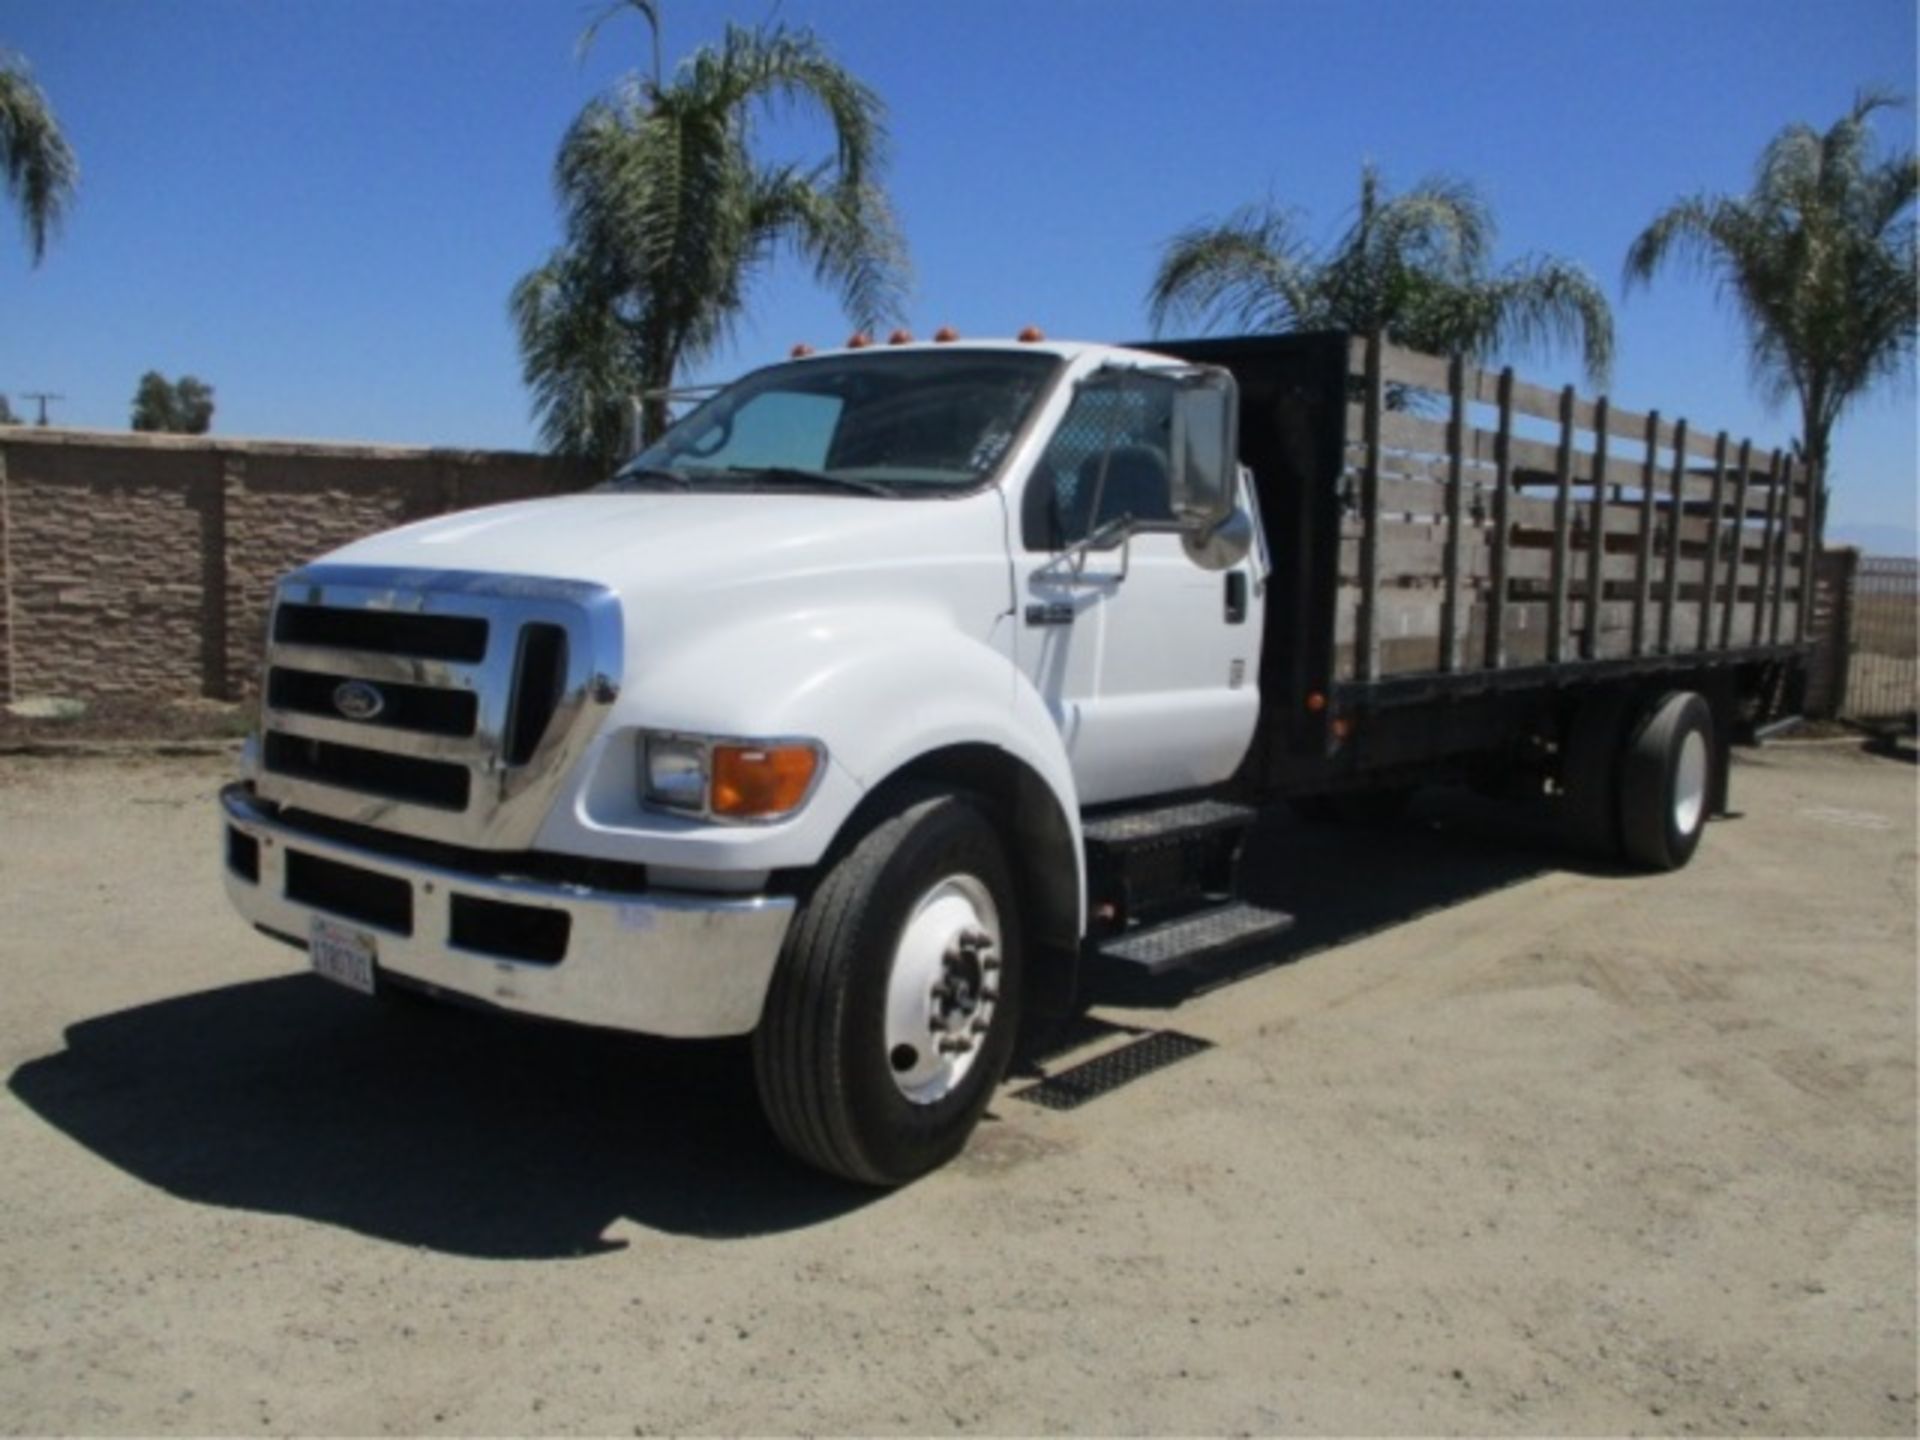 2005 Ford F650 S/A Flatbed Stakebed Truck, Cat C7 Acert 7.2L 6-Cyl Diesel, Automatic, Lift Gate, 24' - Image 4 of 61